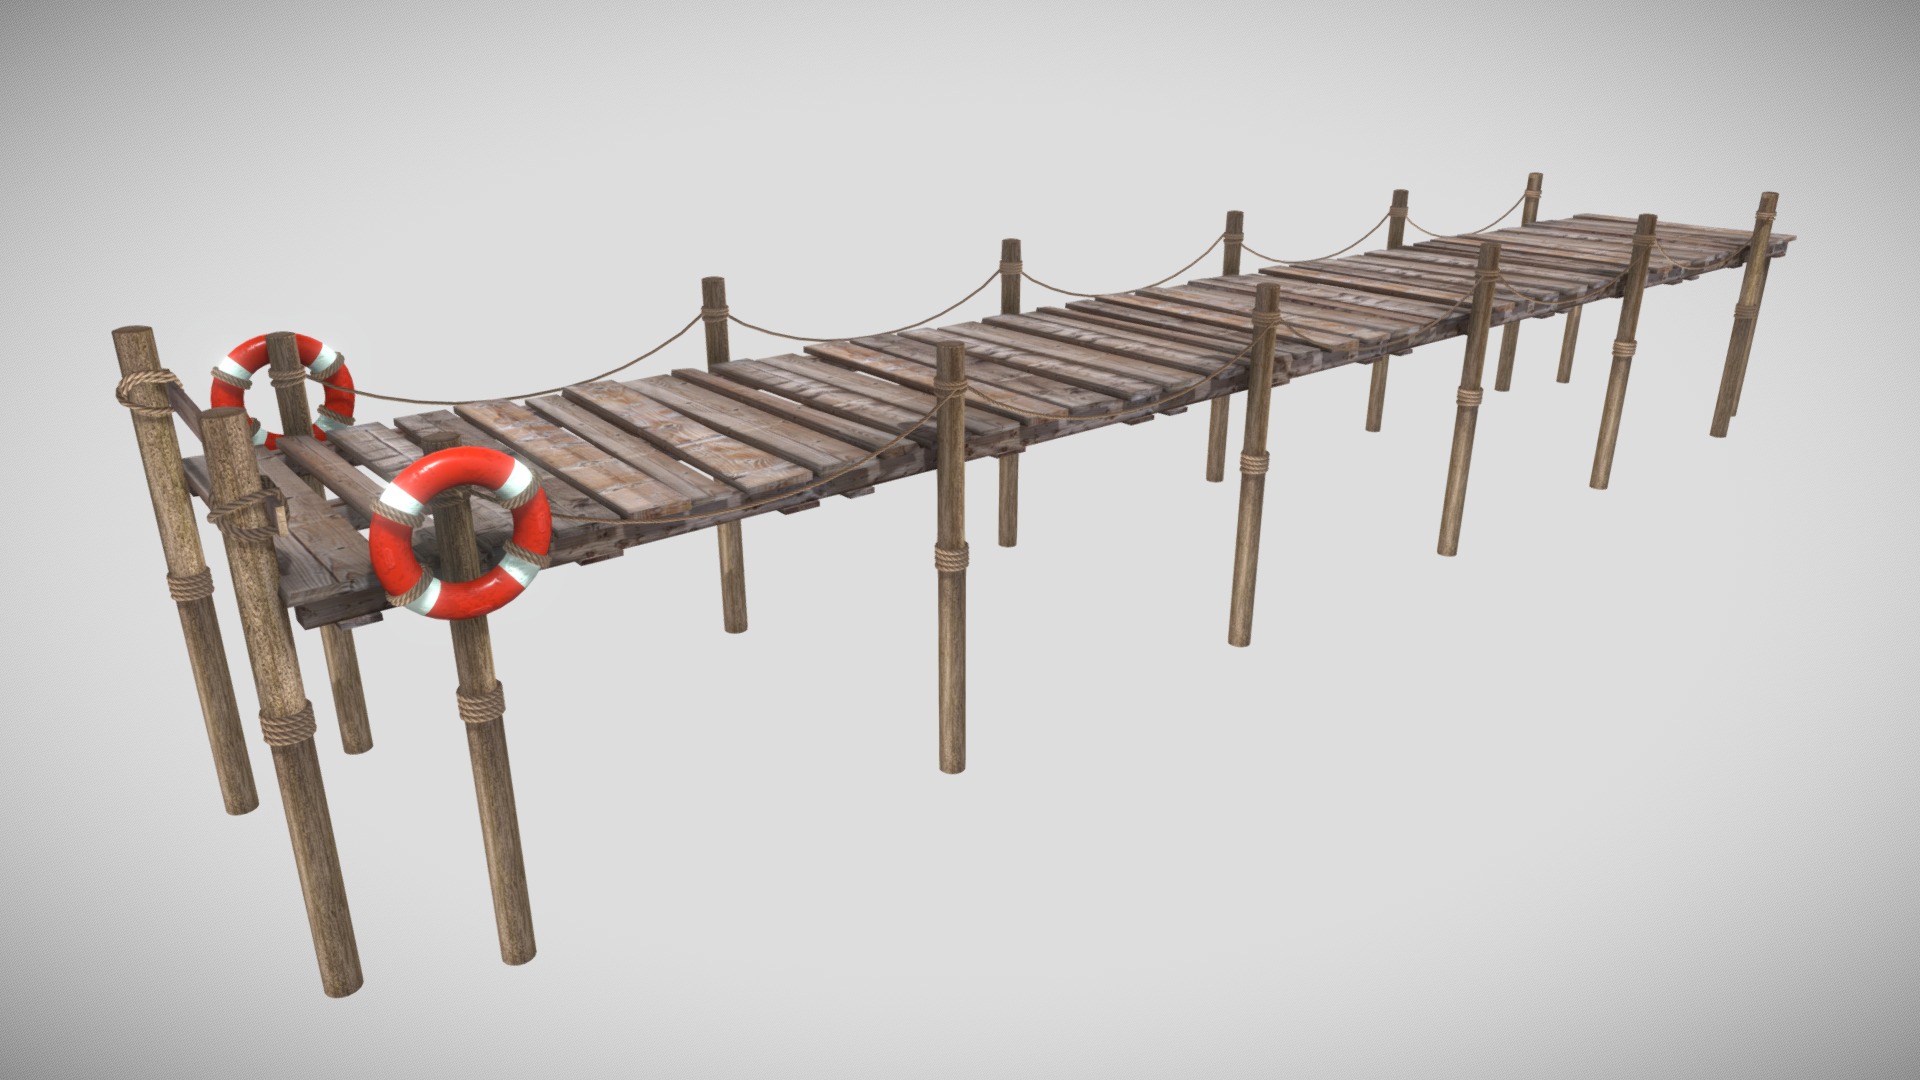 3D model Dock - This is a 3D model of the Dock. The 3D model is about a wooden structure with a red light.